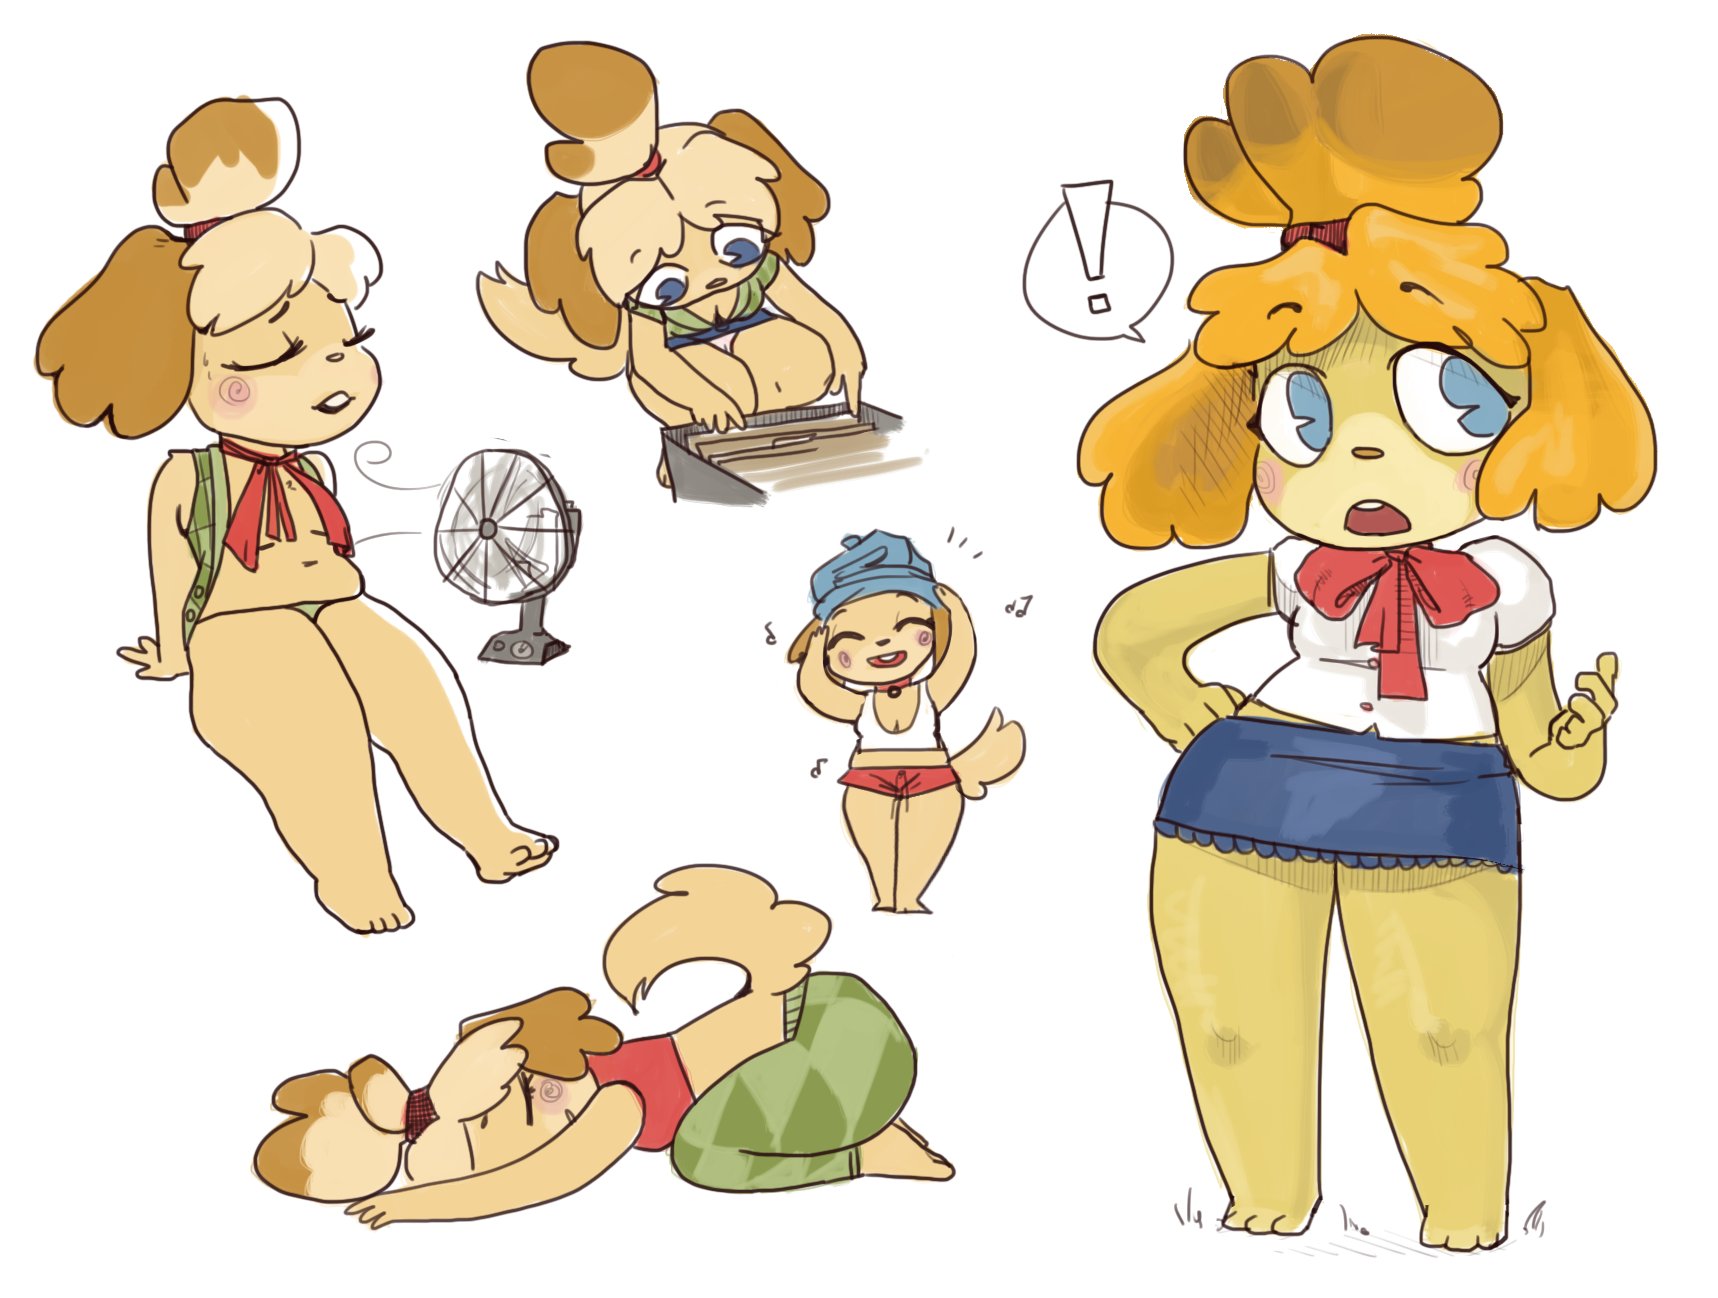 “Doodled some cute Isabelles!!!! (*´꒳`*)
#animalcrossing #isab...